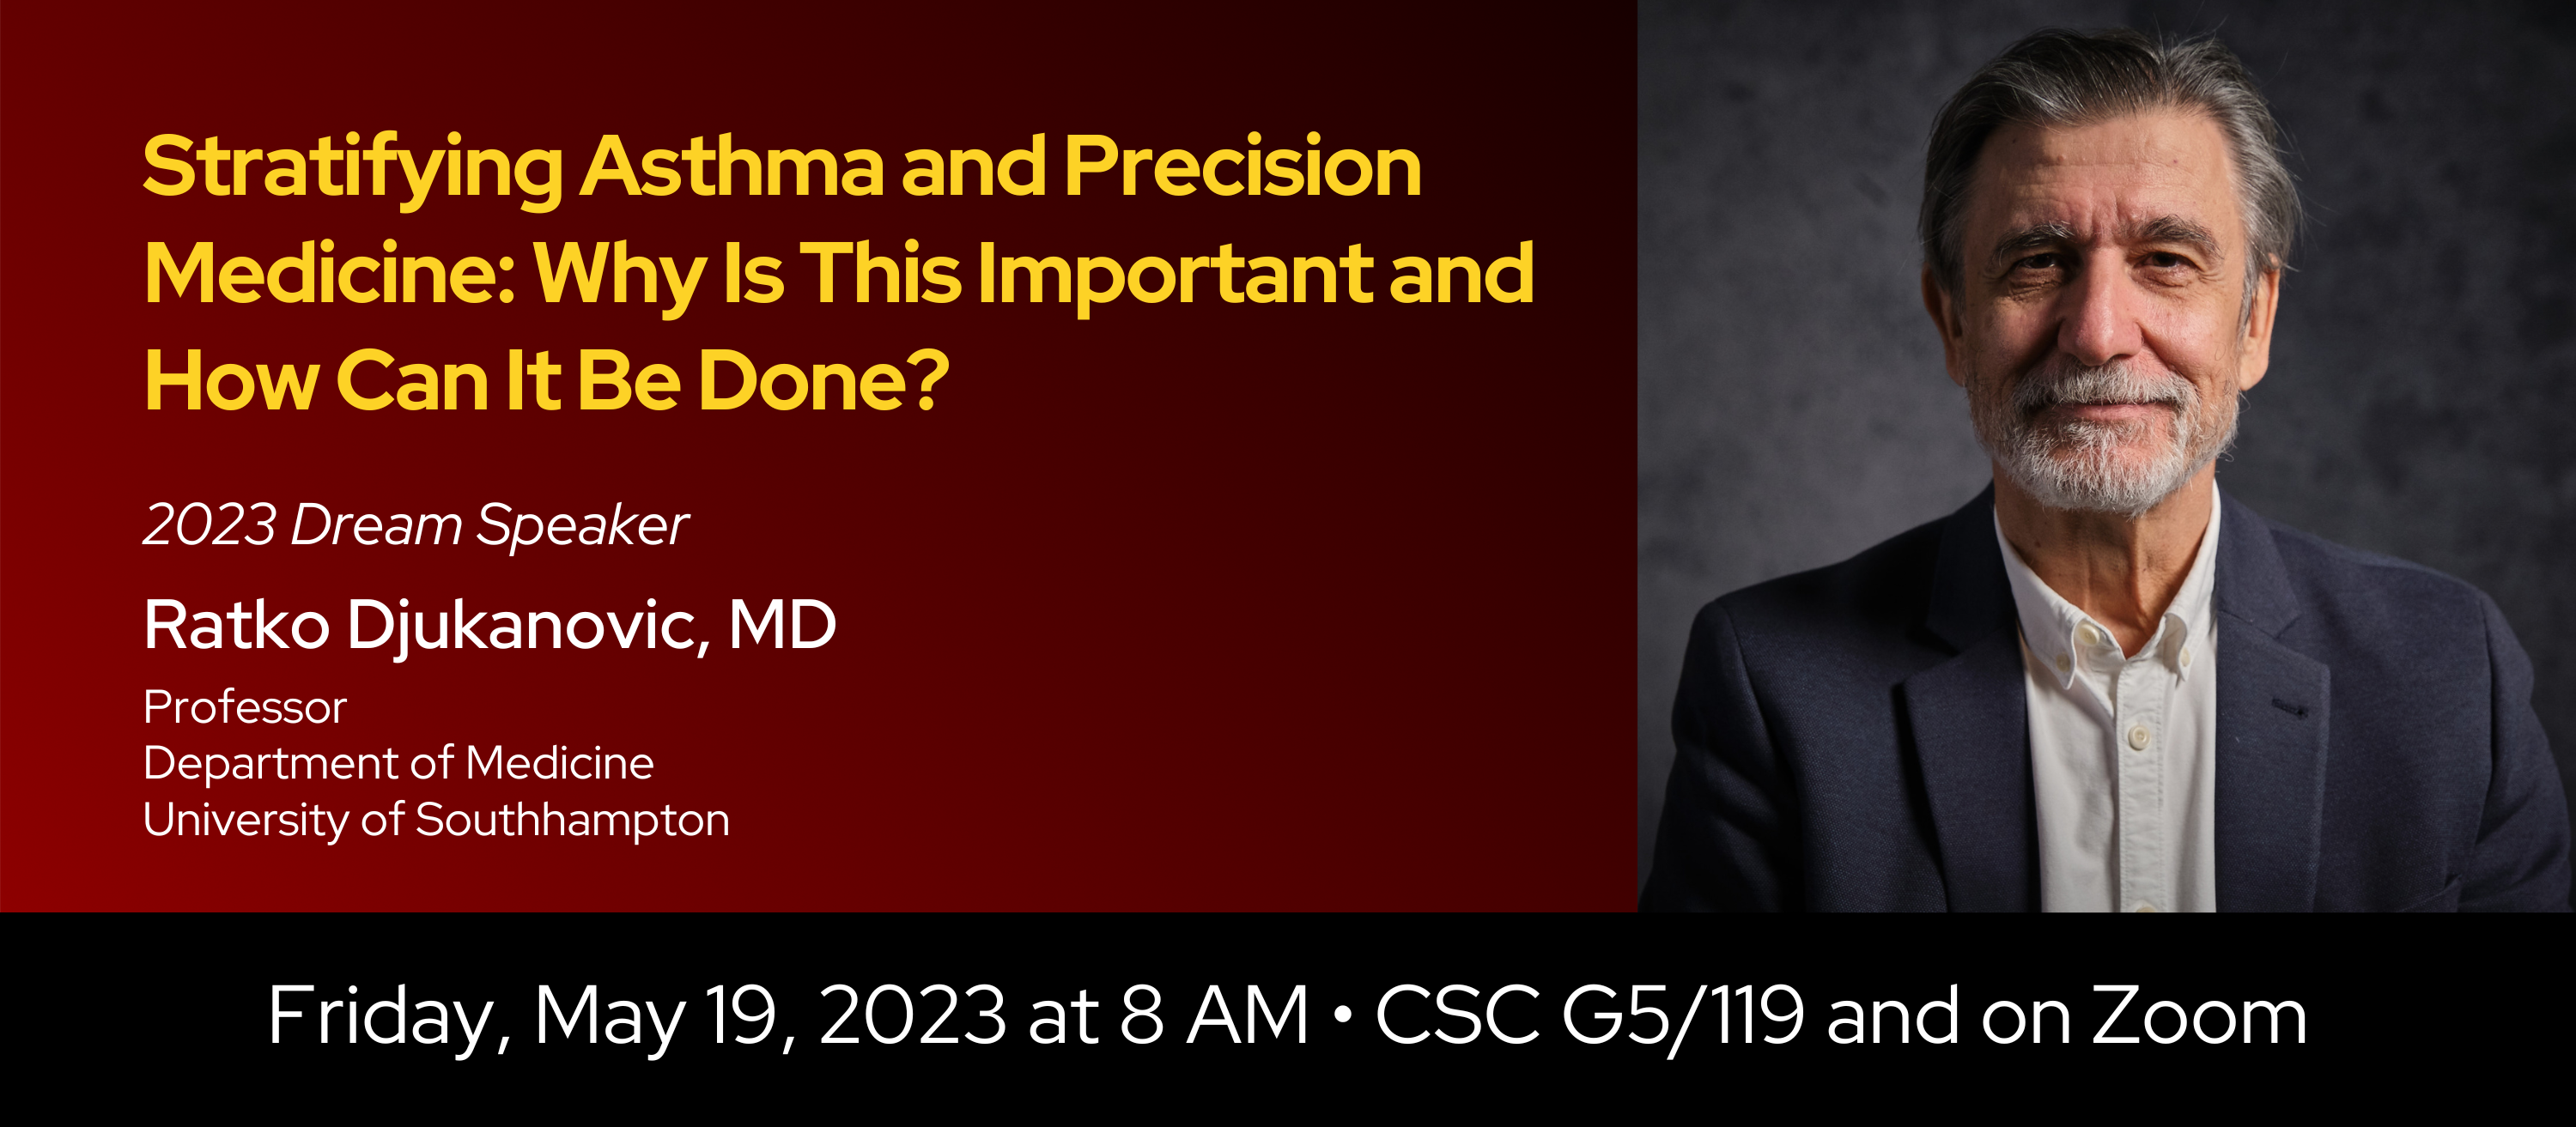 Title: Stratifying Asthma and Precision Medicine: Why Is This Important and How Can It Be Done?